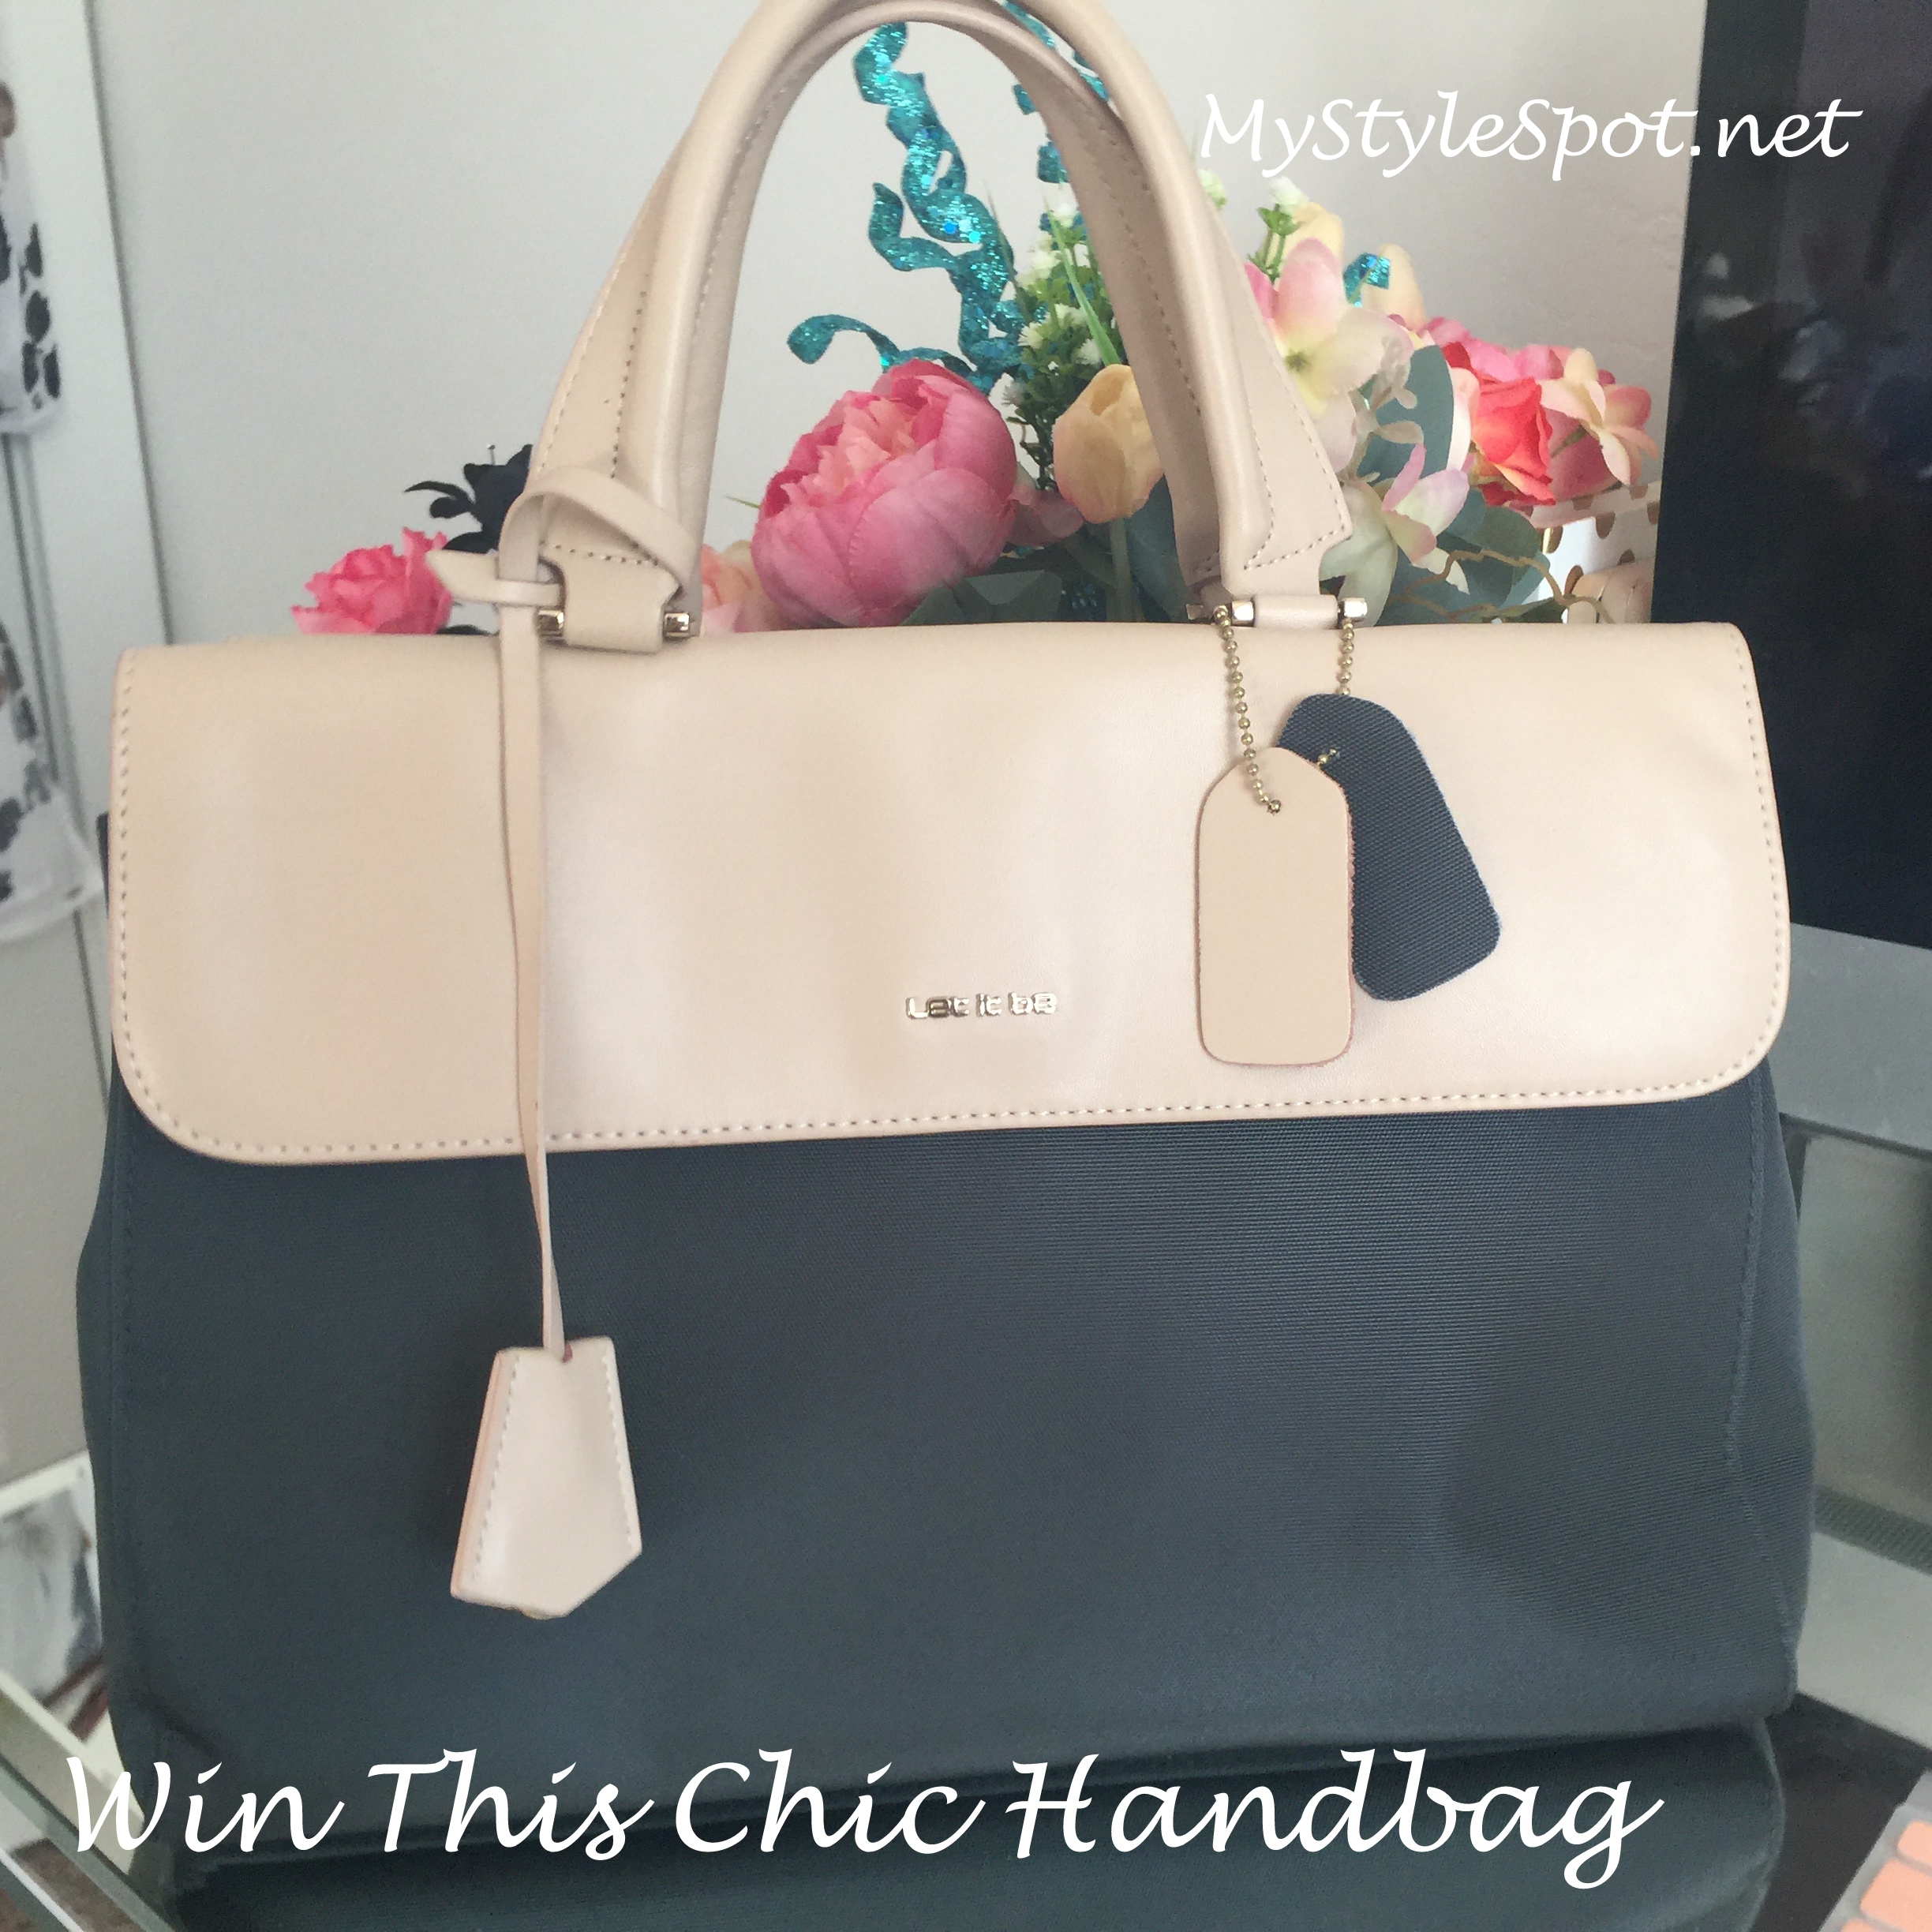 GIVEAWAY: Win a Gorgeous Canvas + Faux Leather Handbag - MyStyleSpot